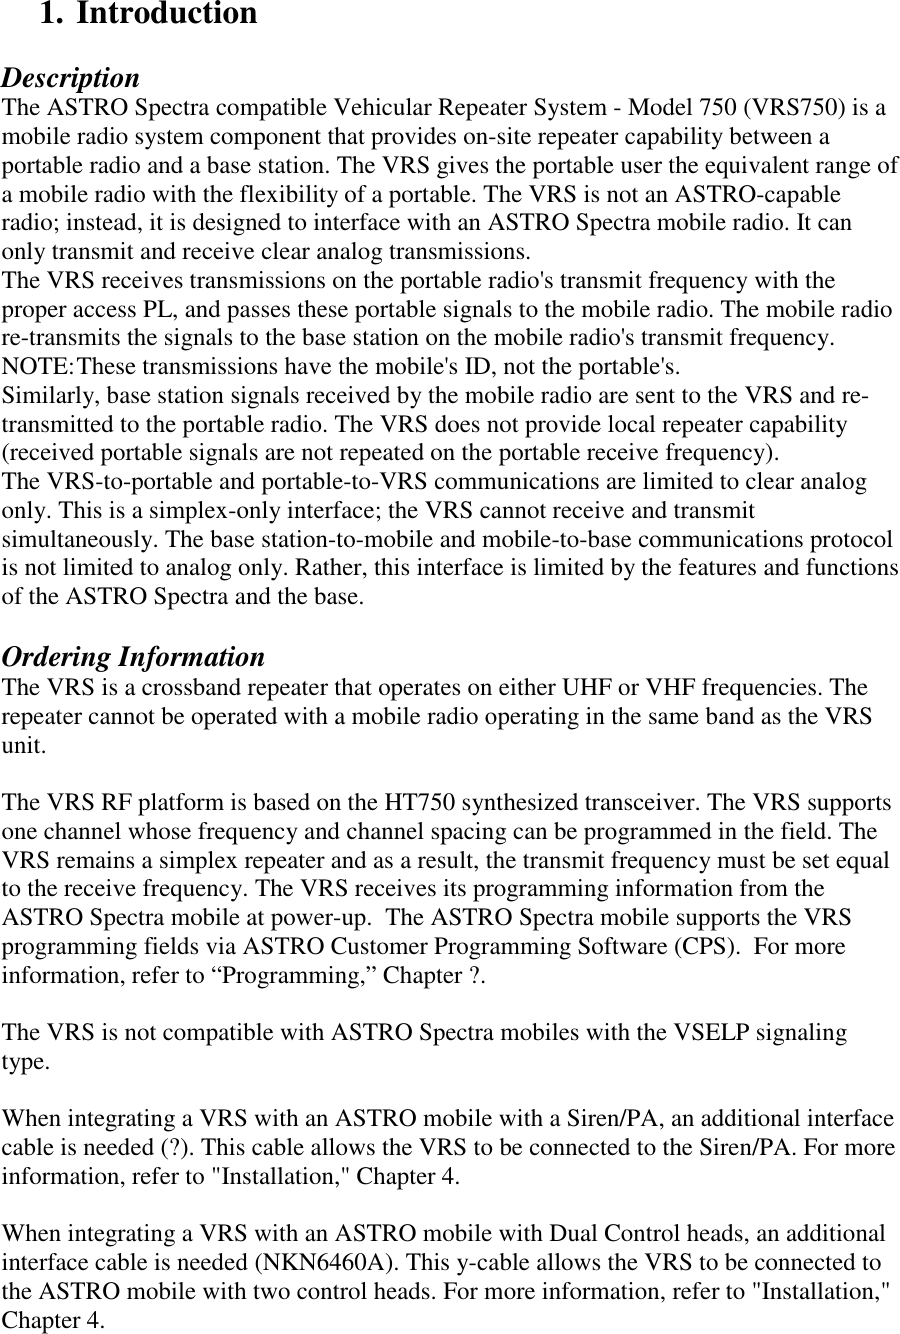 1. Introduction  Description The ASTRO Spectra compatible Vehicular Repeater System - Model 750 (VRS750) is a mobile radio system component that provides on-site repeater capability between a portable radio and a base station. The VRS gives the portable user the equivalent range of a mobile radio with the flexibility of a portable. The VRS is not an ASTRO-capable radio; instead, it is designed to interface with an ASTRO Spectra mobile radio. It can only transmit and receive clear analog transmissions. The VRS receives transmissions on the portable radio&apos;s transmit frequency with the proper access PL, and passes these portable signals to the mobile radio. The mobile radio re-transmits the signals to the base station on the mobile radio&apos;s transmit frequency.  NOTE: These transmissions have the mobile&apos;s ID, not the portable&apos;s. Similarly, base station signals received by the mobile radio are sent to the VRS and re-transmitted to the portable radio. The VRS does not provide local repeater capability (received portable signals are not repeated on the portable receive frequency). The VRS-to-portable and portable-to-VRS communications are limited to clear analog only. This is a simplex-only interface; the VRS cannot receive and transmit simultaneously. The base station-to-mobile and mobile-to-base communications protocol is not limited to analog only. Rather, this interface is limited by the features and functions of the ASTRO Spectra and the base.  Ordering Information The VRS is a crossband repeater that operates on either UHF or VHF frequencies. The repeater cannot be operated with a mobile radio operating in the same band as the VRS unit.   The VRS RF platform is based on the HT750 synthesized transceiver. The VRS supports one channel whose frequency and channel spacing can be programmed in the field. The VRS remains a simplex repeater and as a result, the transmit frequency must be set equal to the receive frequency. The VRS receives its programming information from the ASTRO Spectra mobile at power-up.  The ASTRO Spectra mobile supports the VRS programming fields via ASTRO Customer Programming Software (CPS).  For more information, refer to “Programming,” Chapter ?.      The VRS is not compatible with ASTRO Spectra mobiles with the VSELP signaling type.  When integrating a VRS with an ASTRO mobile with a Siren/PA, an additional interface cable is needed (?). This cable allows the VRS to be connected to the Siren/PA. For more information, refer to &quot;Installation,&quot; Chapter 4.  When integrating a VRS with an ASTRO mobile with Dual Control heads, an additional interface cable is needed (NKN6460A). This y-cable allows the VRS to be connected to the ASTRO mobile with two control heads. For more information, refer to &quot;Installation,&quot; Chapter 4. 